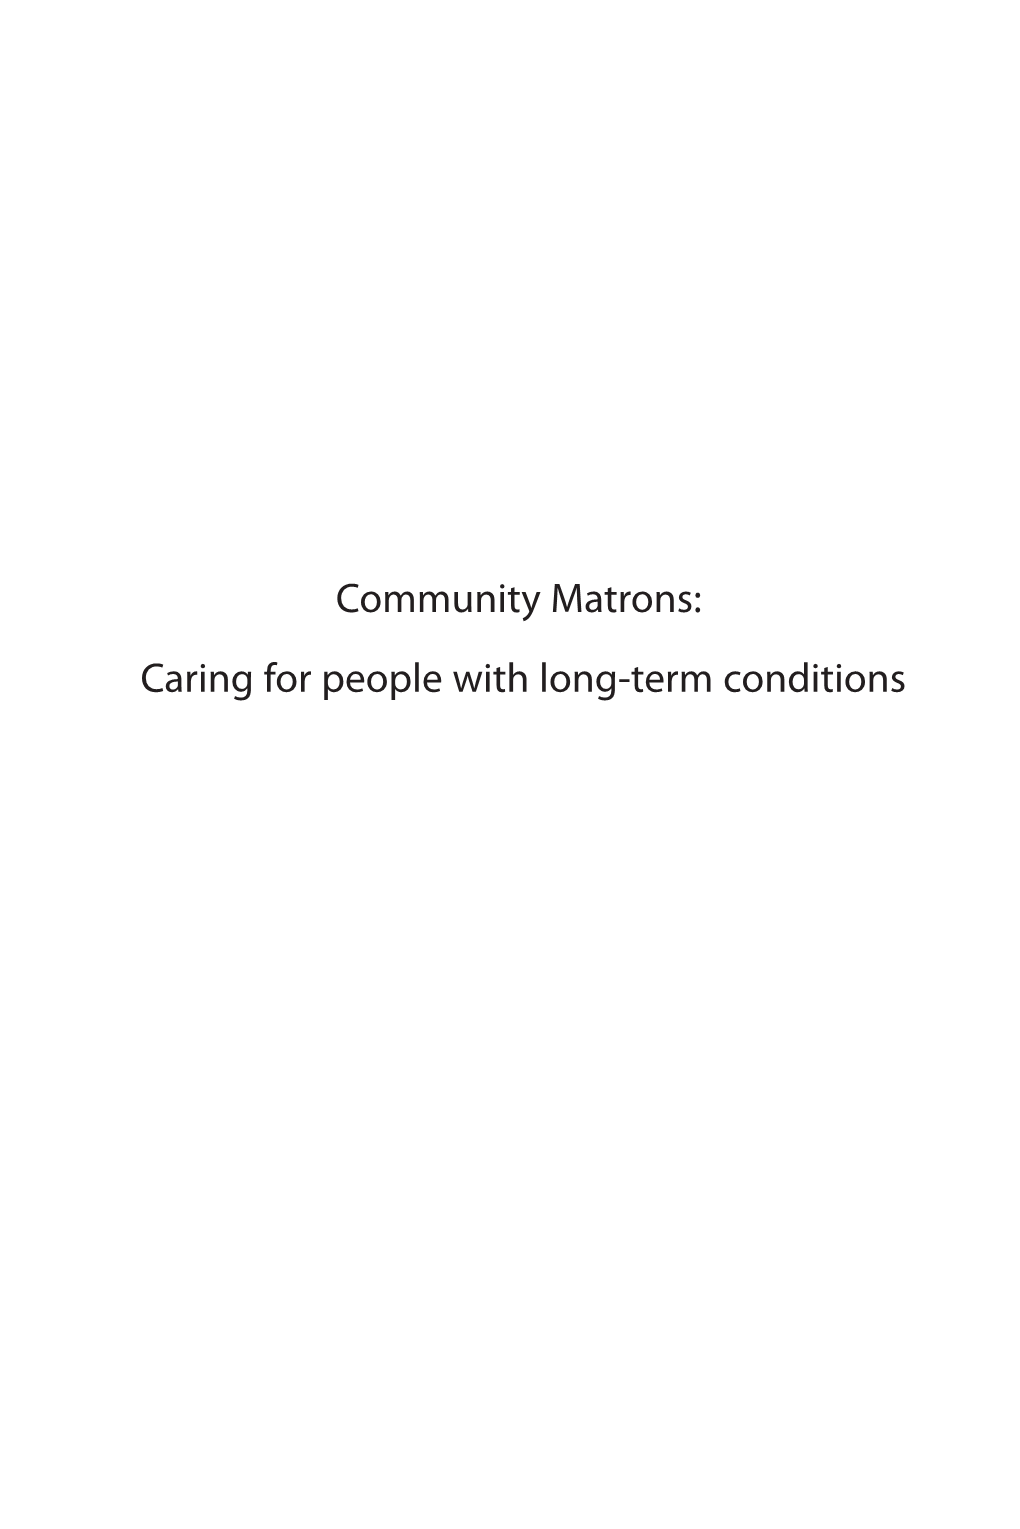 Community Matrons: Caring for People with Long-Term Conditions